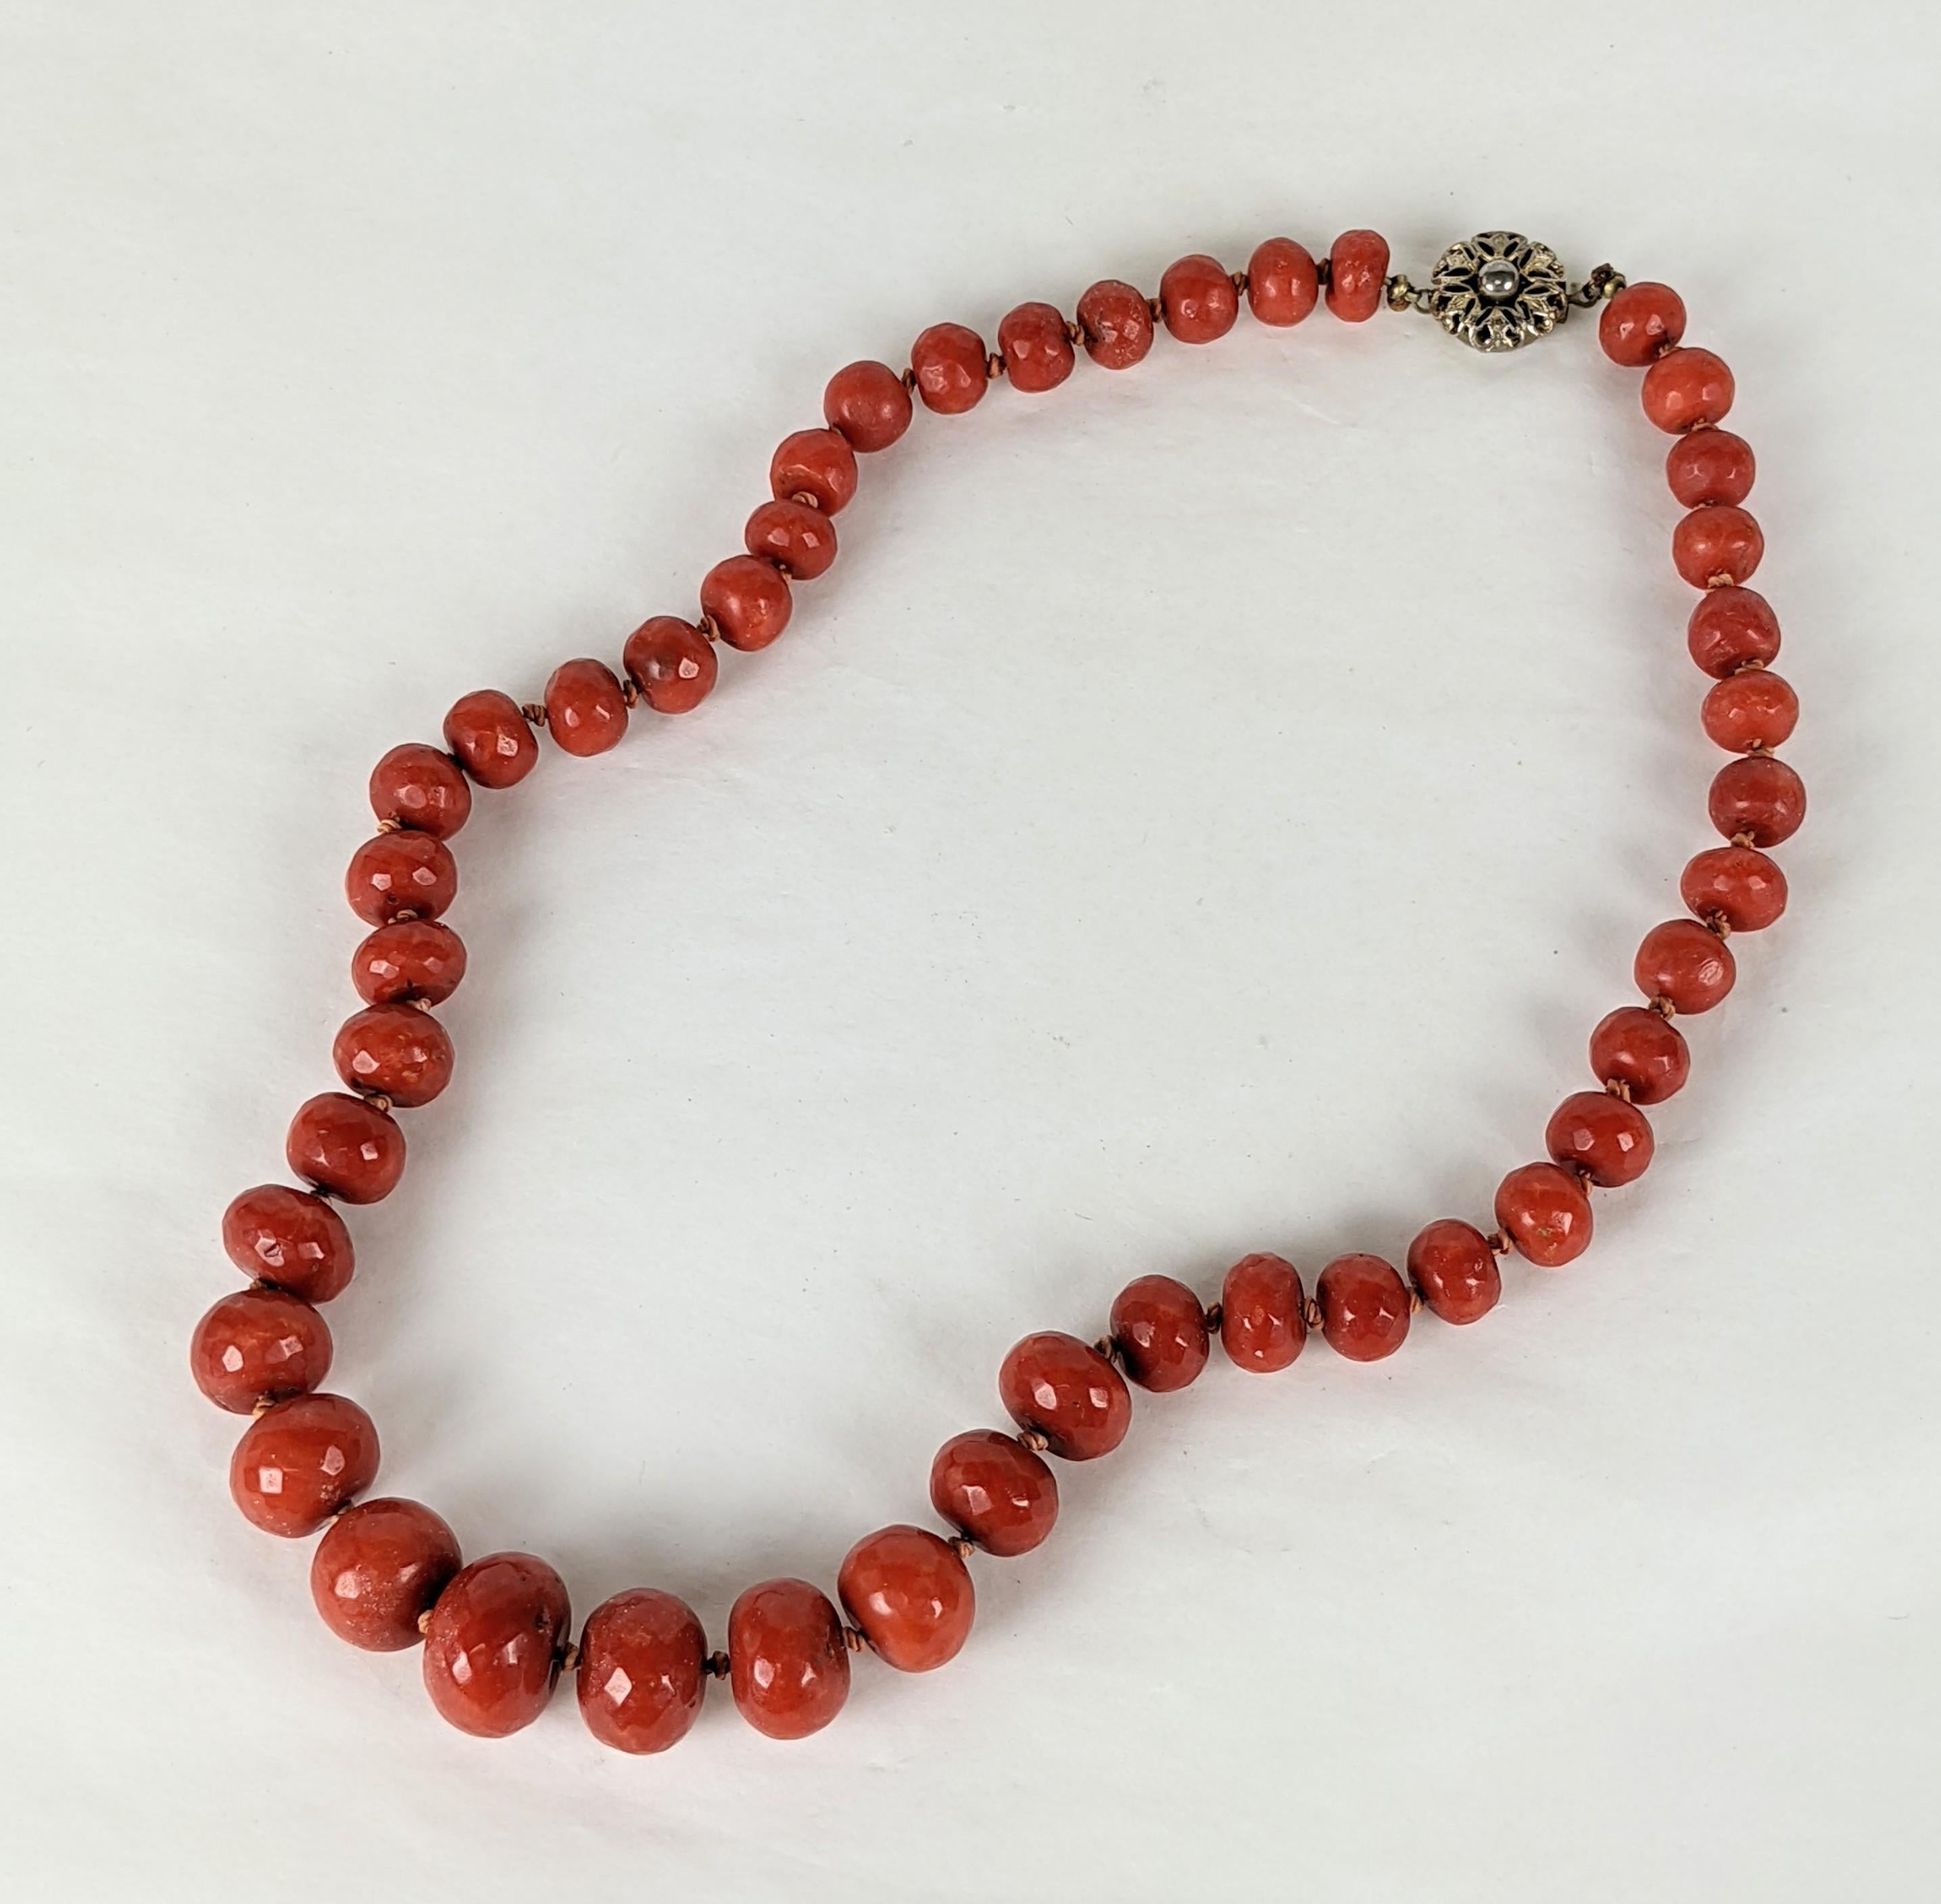 Fine Victorian Faceted Natural Graduated Red Coral Beads with period metal filigree clasp. 15